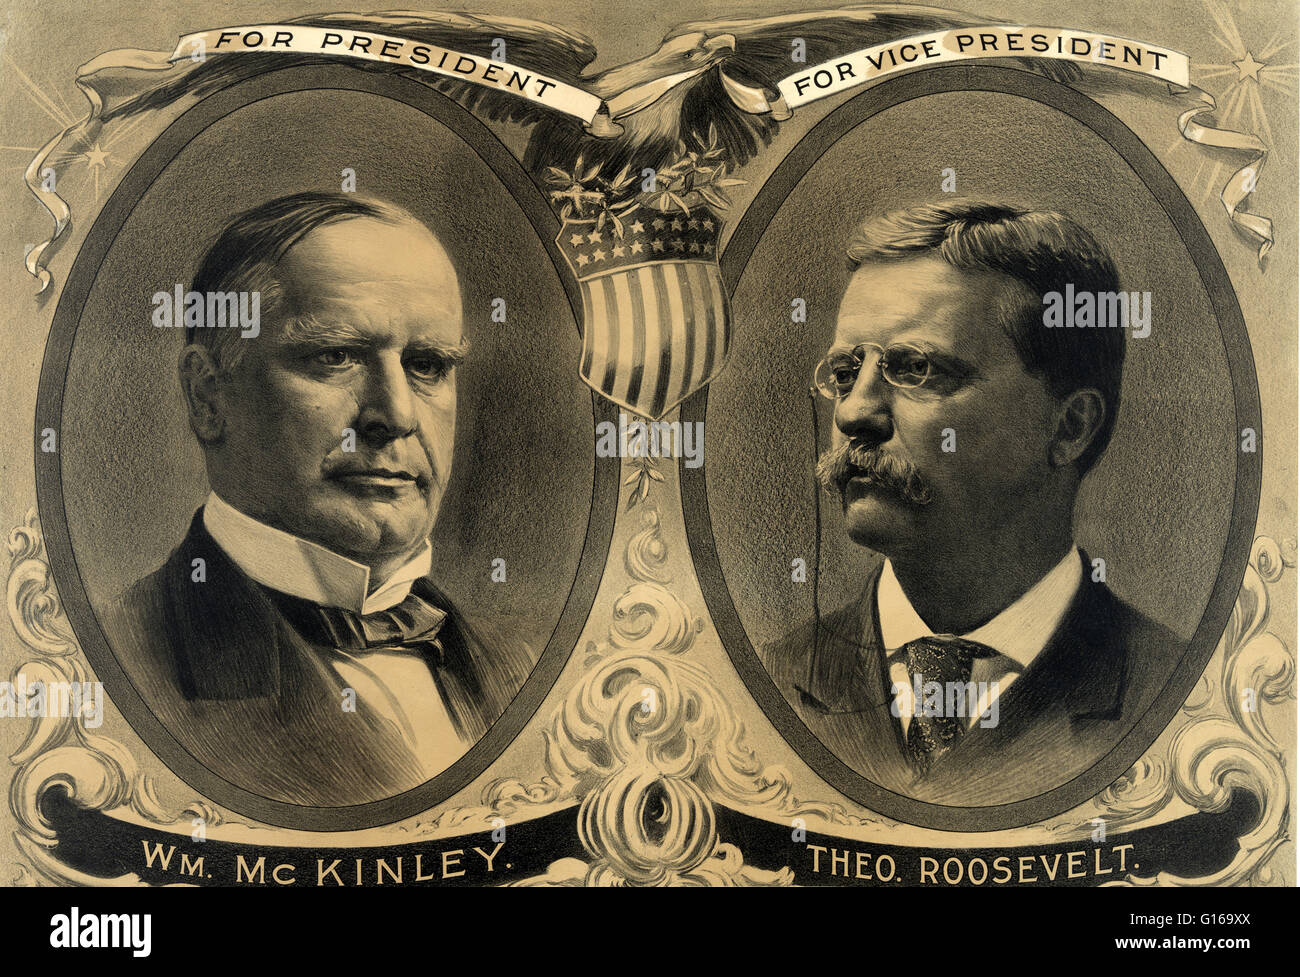 William McKinley and Theodore Roosevelt Campaign Poster, 1900William McKinley (January 29, 1843 - September 14, 1901) was the 25th President of the United States (1897-1901). He was the last President to have served in the American Civil War. After the wa Stock Photo